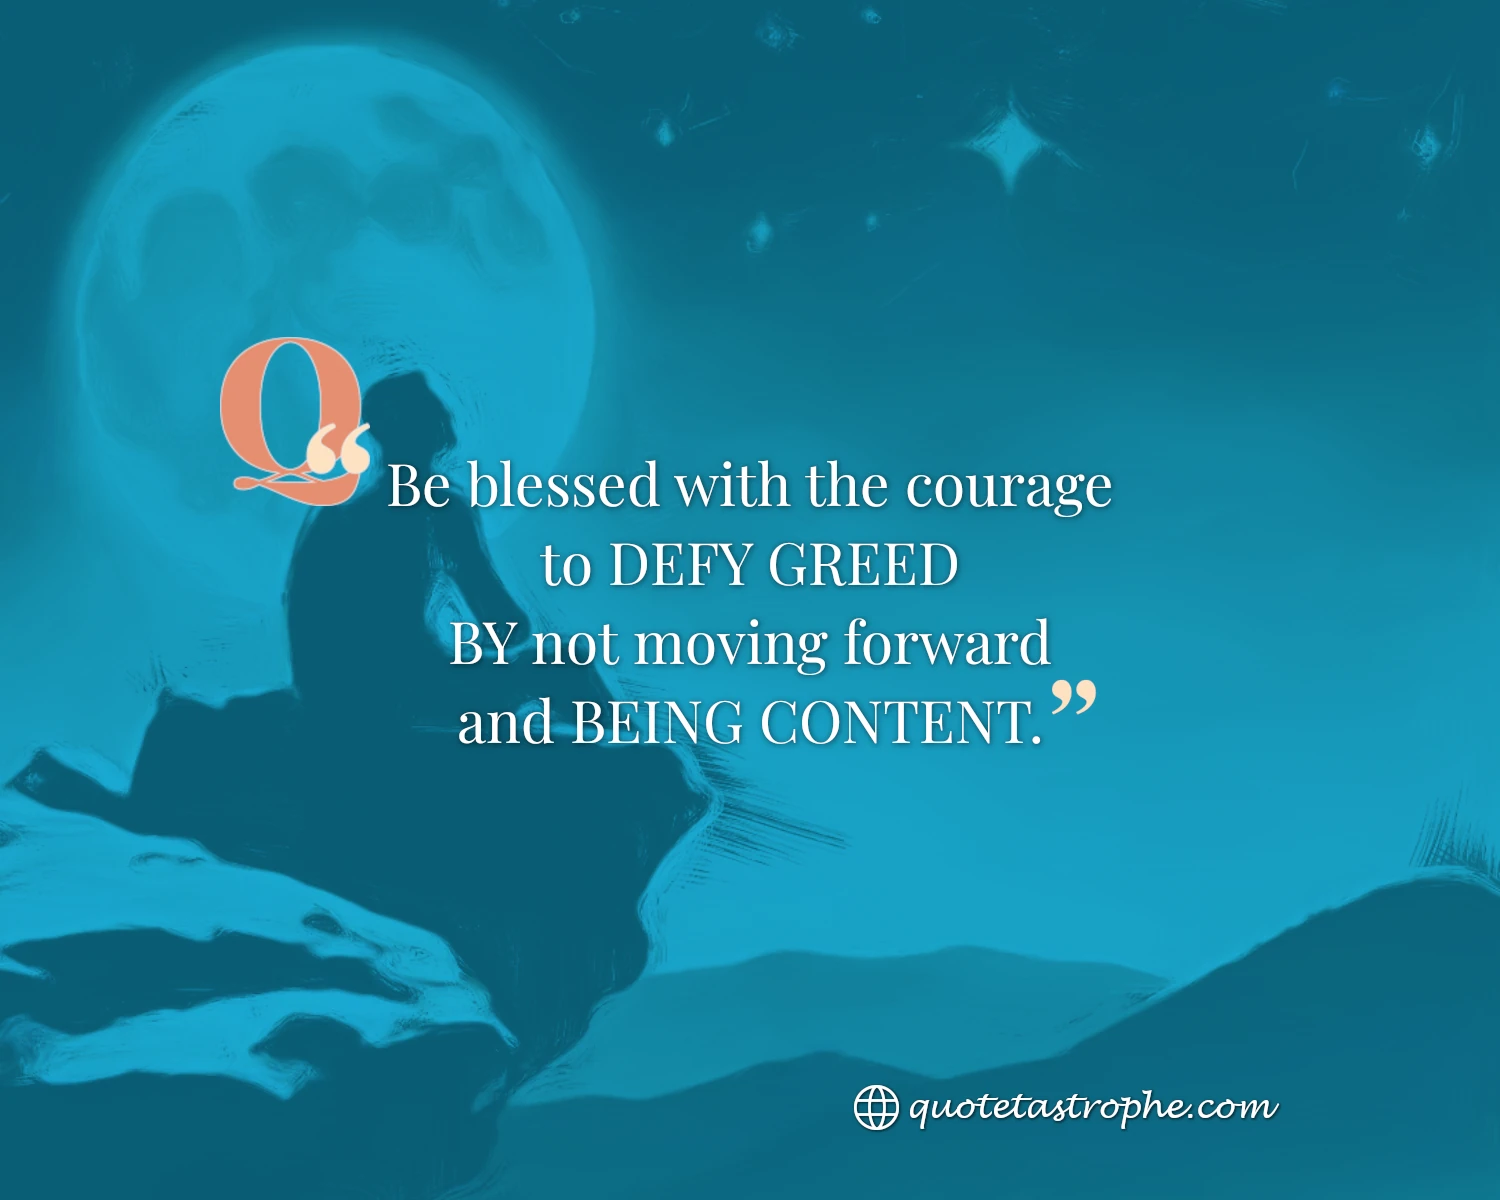 Be Blessed With The Courage to Defy Greed By Not Moving